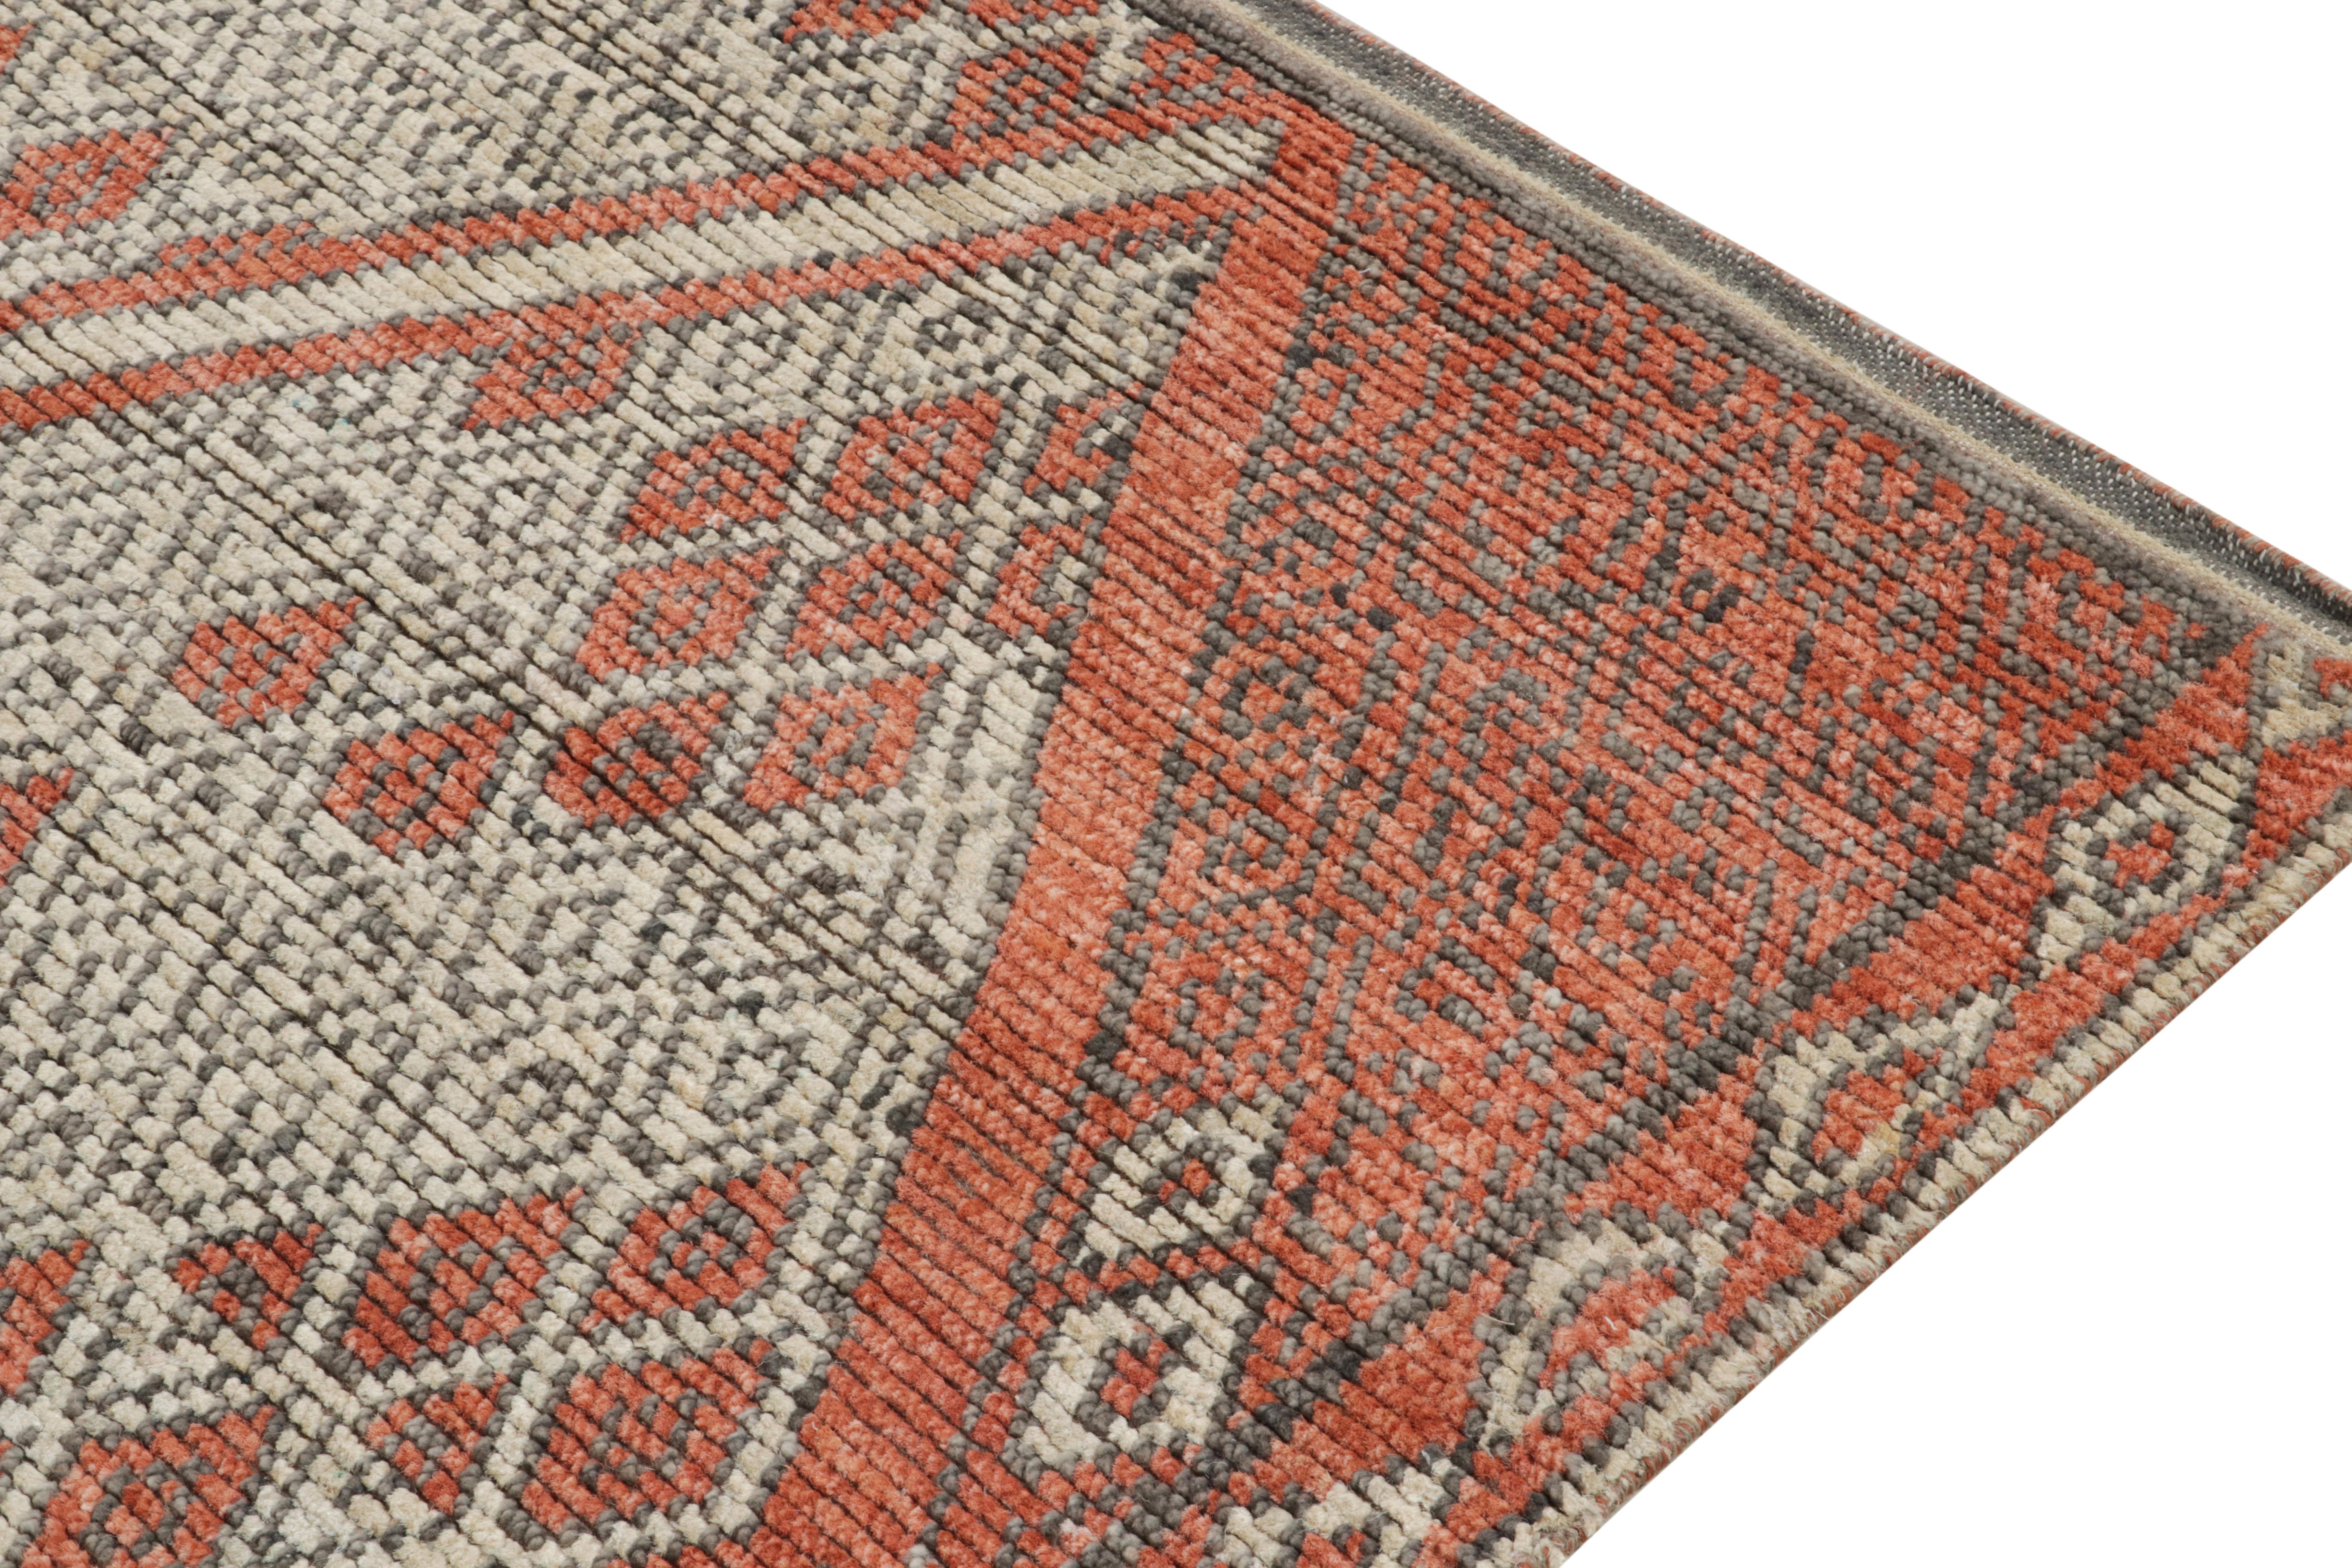 Hand-Knotted Rug & Kilim's Moroccan Style Rug in Orange, White, Gray Diamond Patterns For Sale